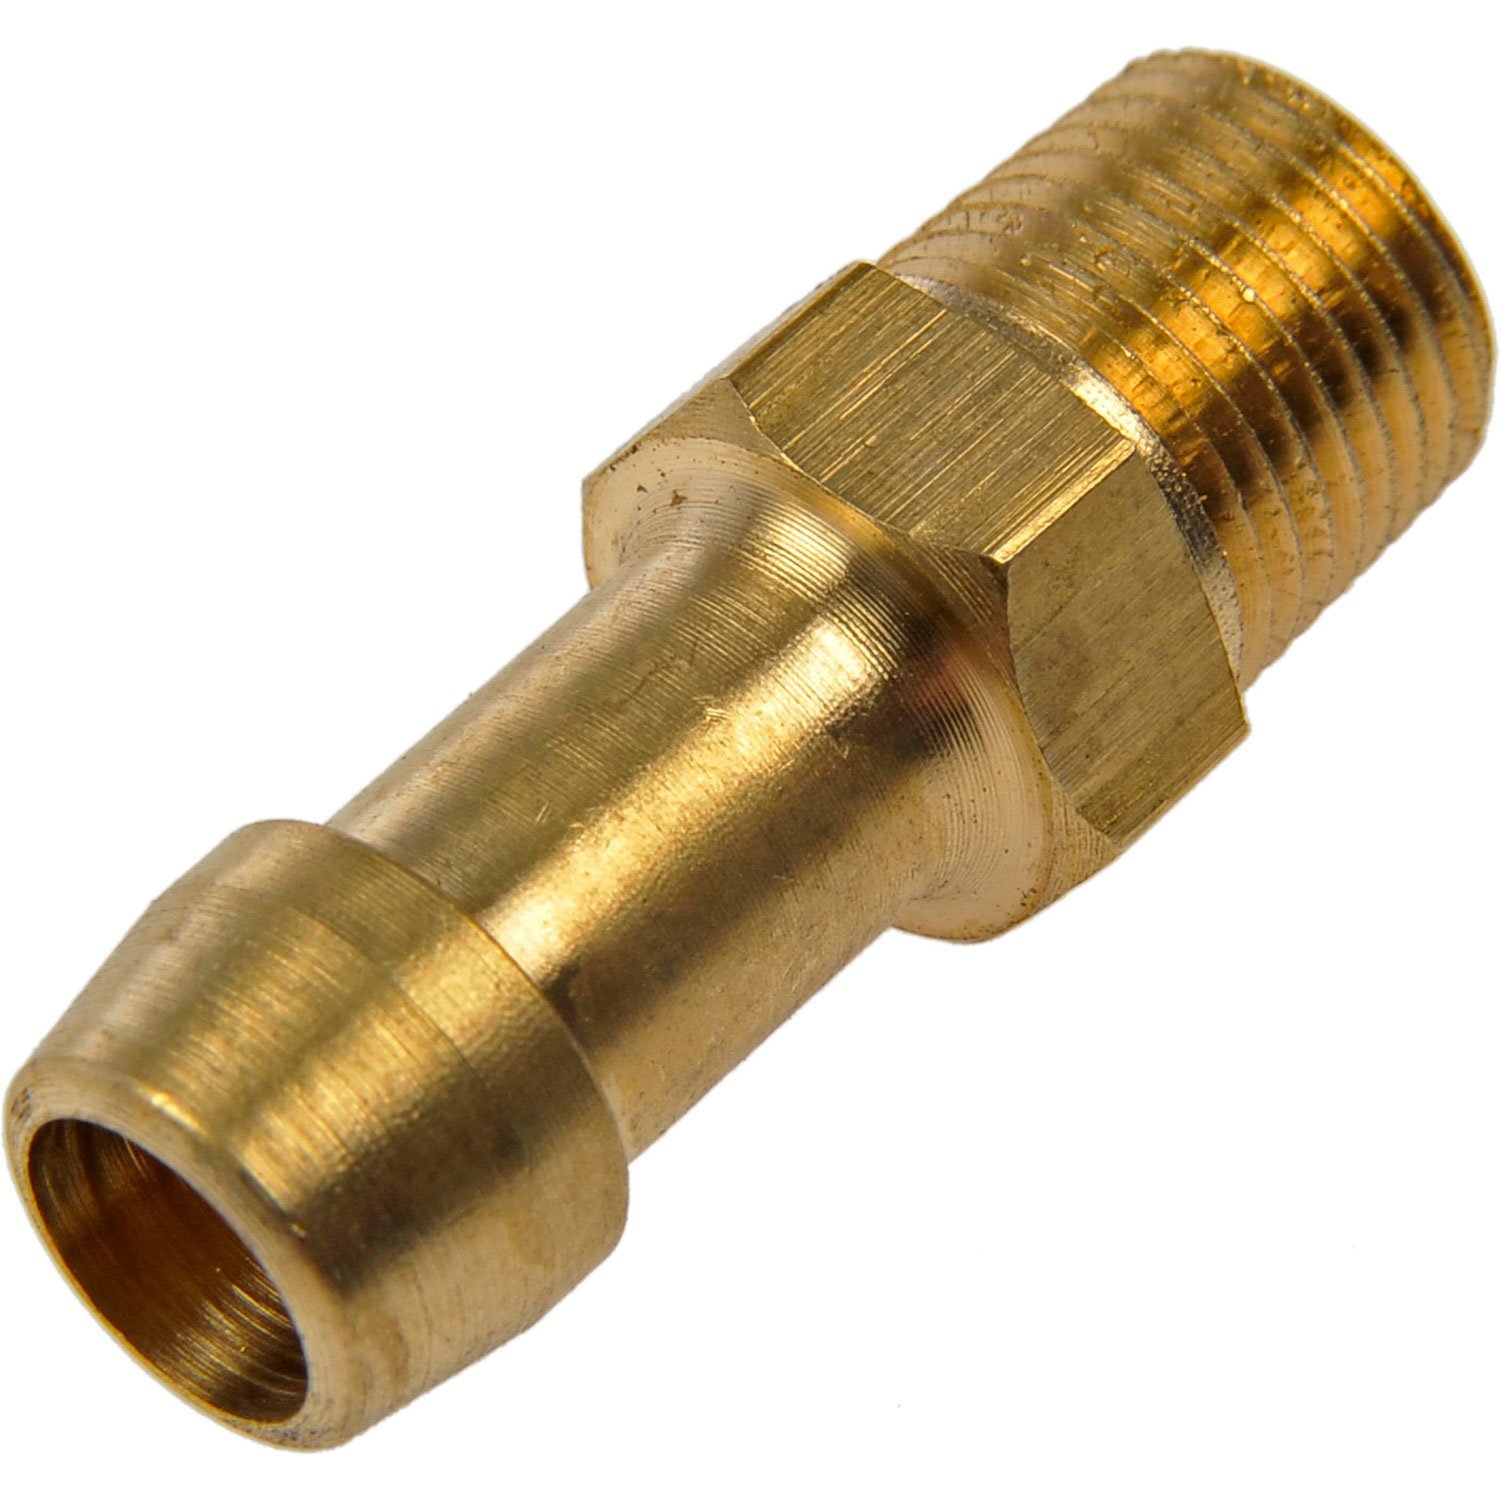 Fuel Hose Fitting-Male Connector-5/16 In. x 1/8 In. MNPT